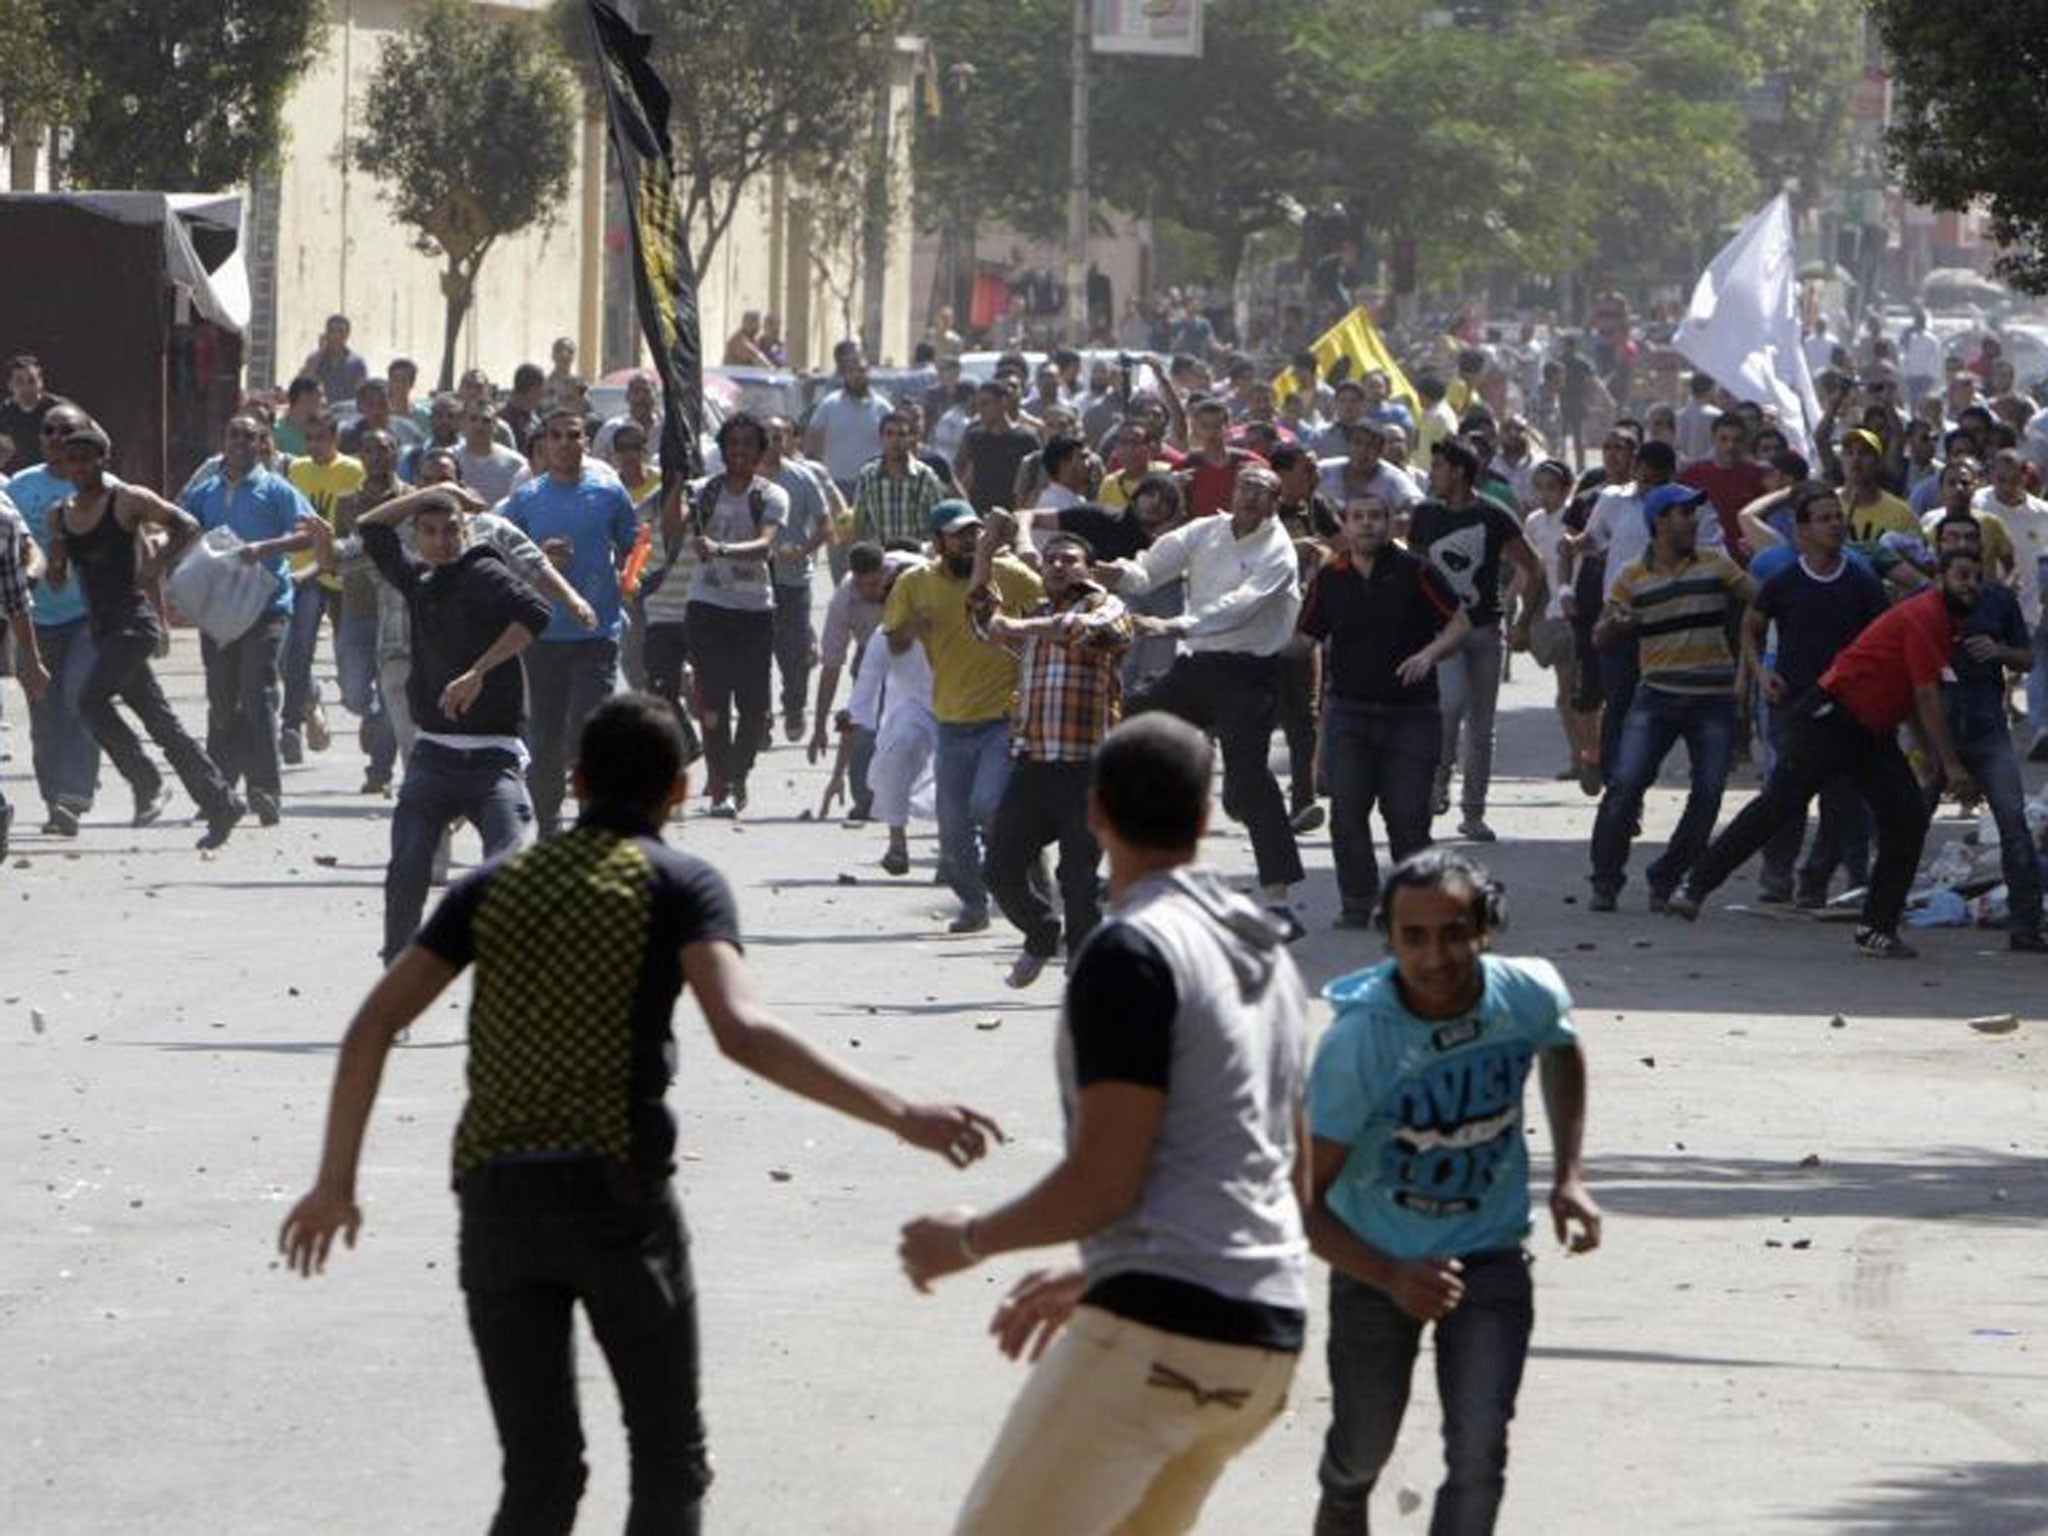 Supporters of deposed President Mohamed Morsi and the Muslim Brotherhood clash with anti-Morsi protesters during a march in Shubra street in Cairo